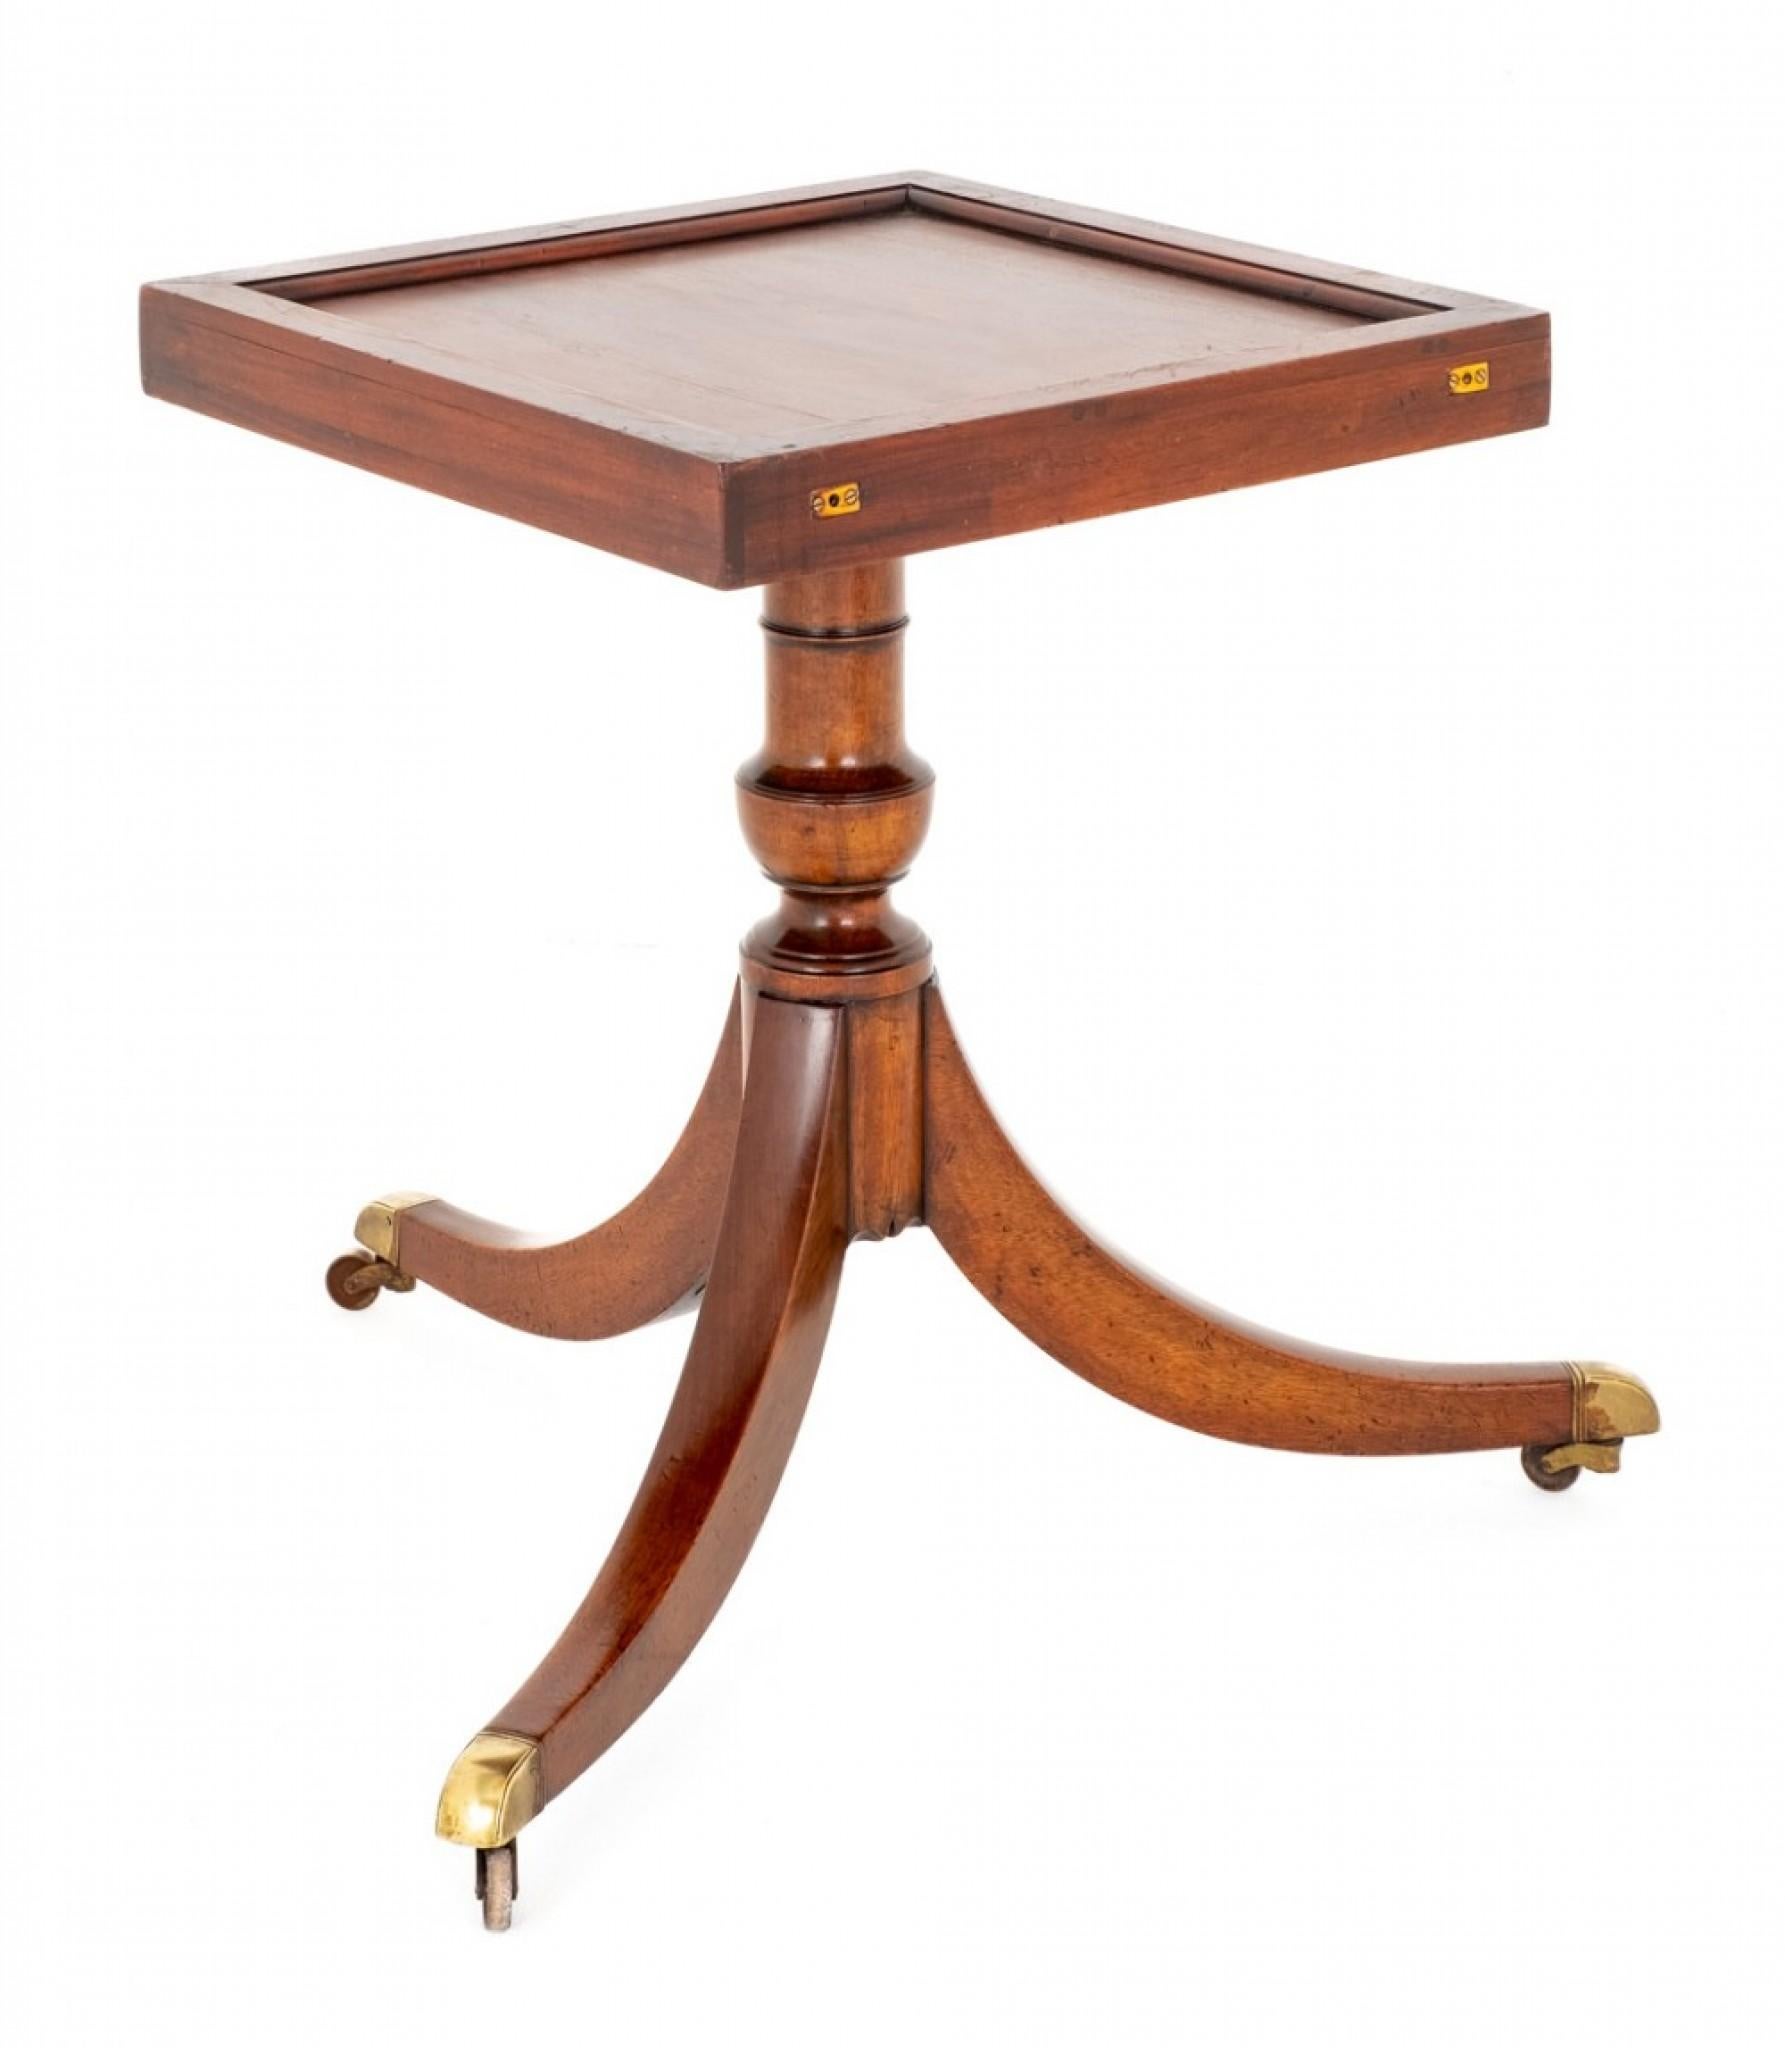 Regency Dining Table - Mahogany 2 Pedestal Period Antique For Sale 12